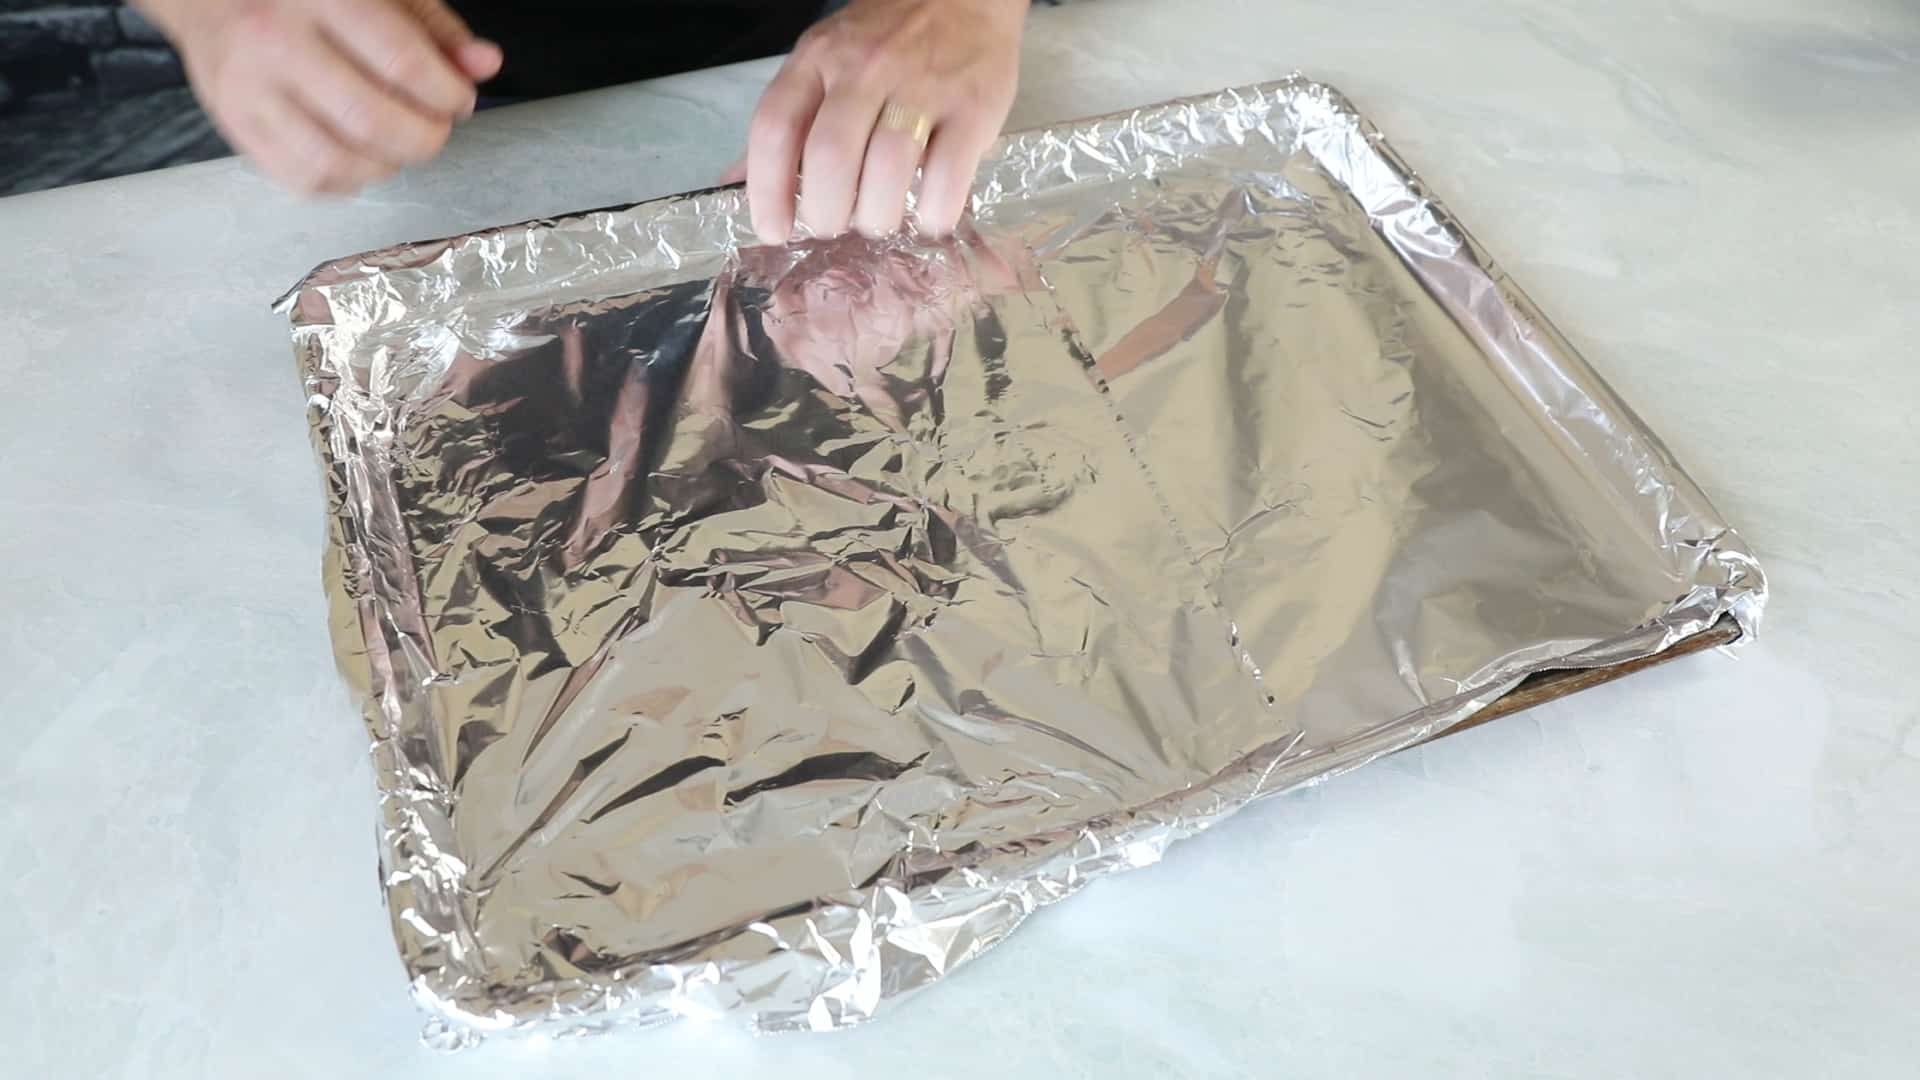 Covering a baking sheet with aluminum foil